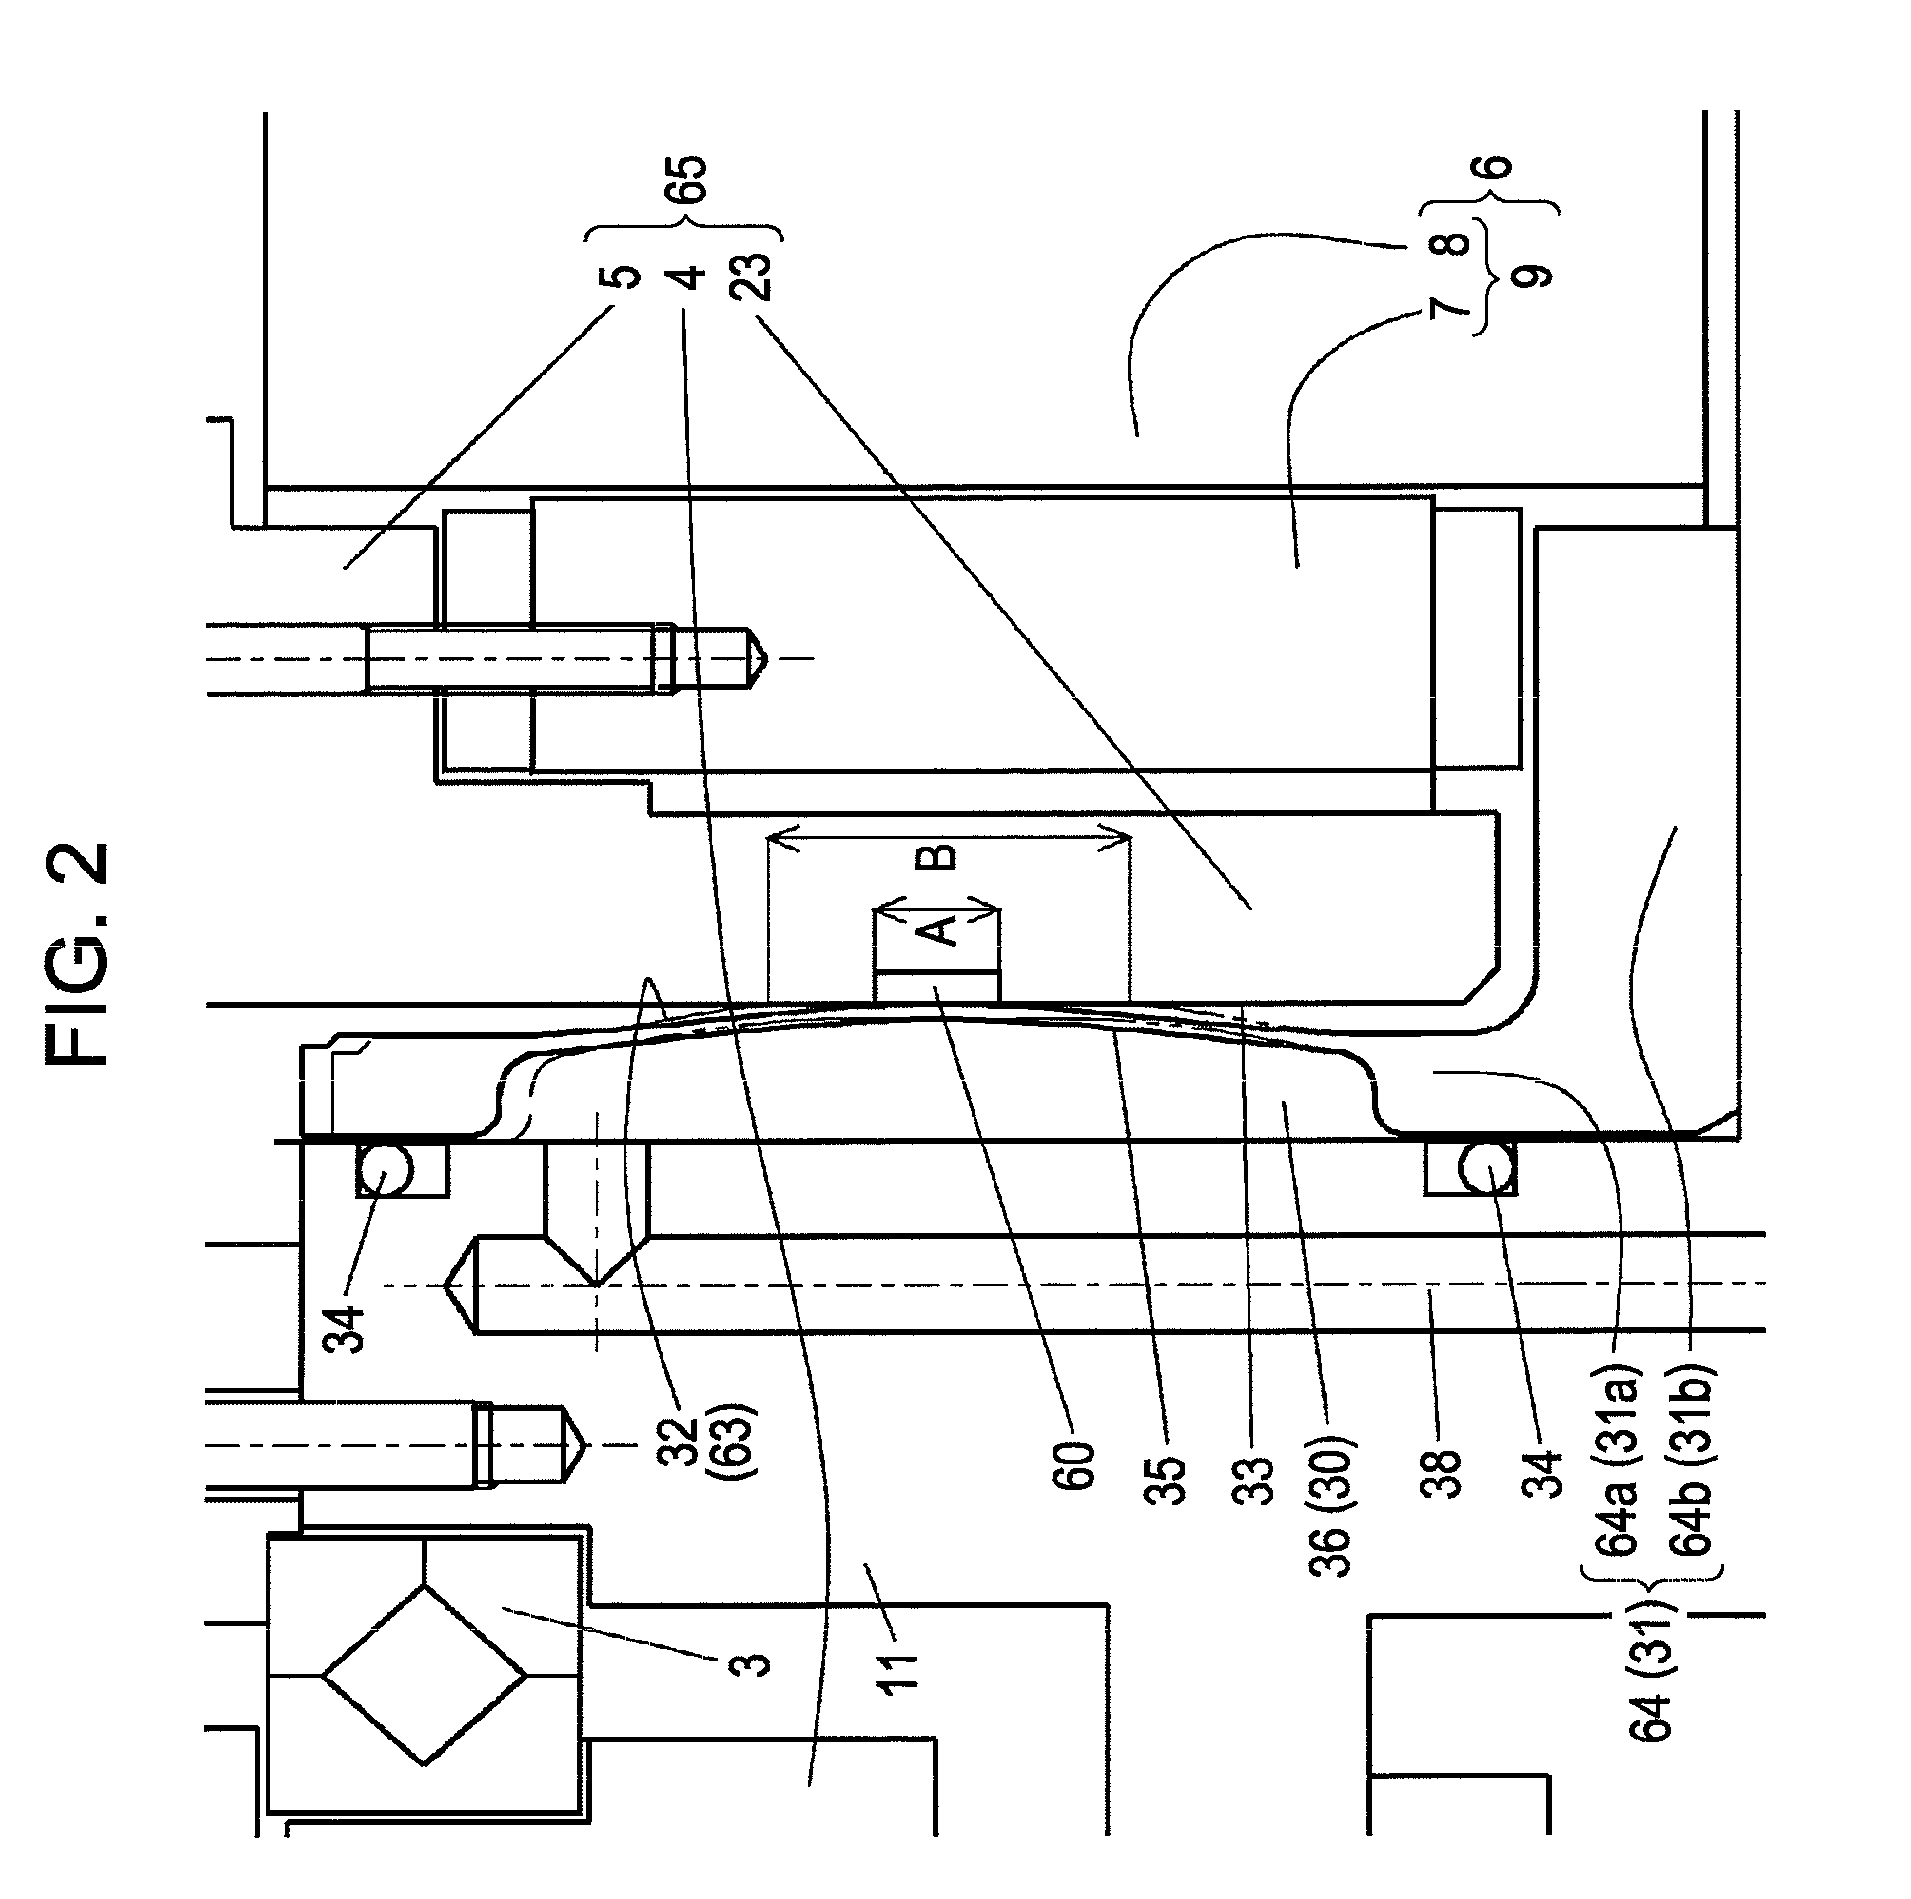 Rotation-resistance device for main shaft drive of machine tool